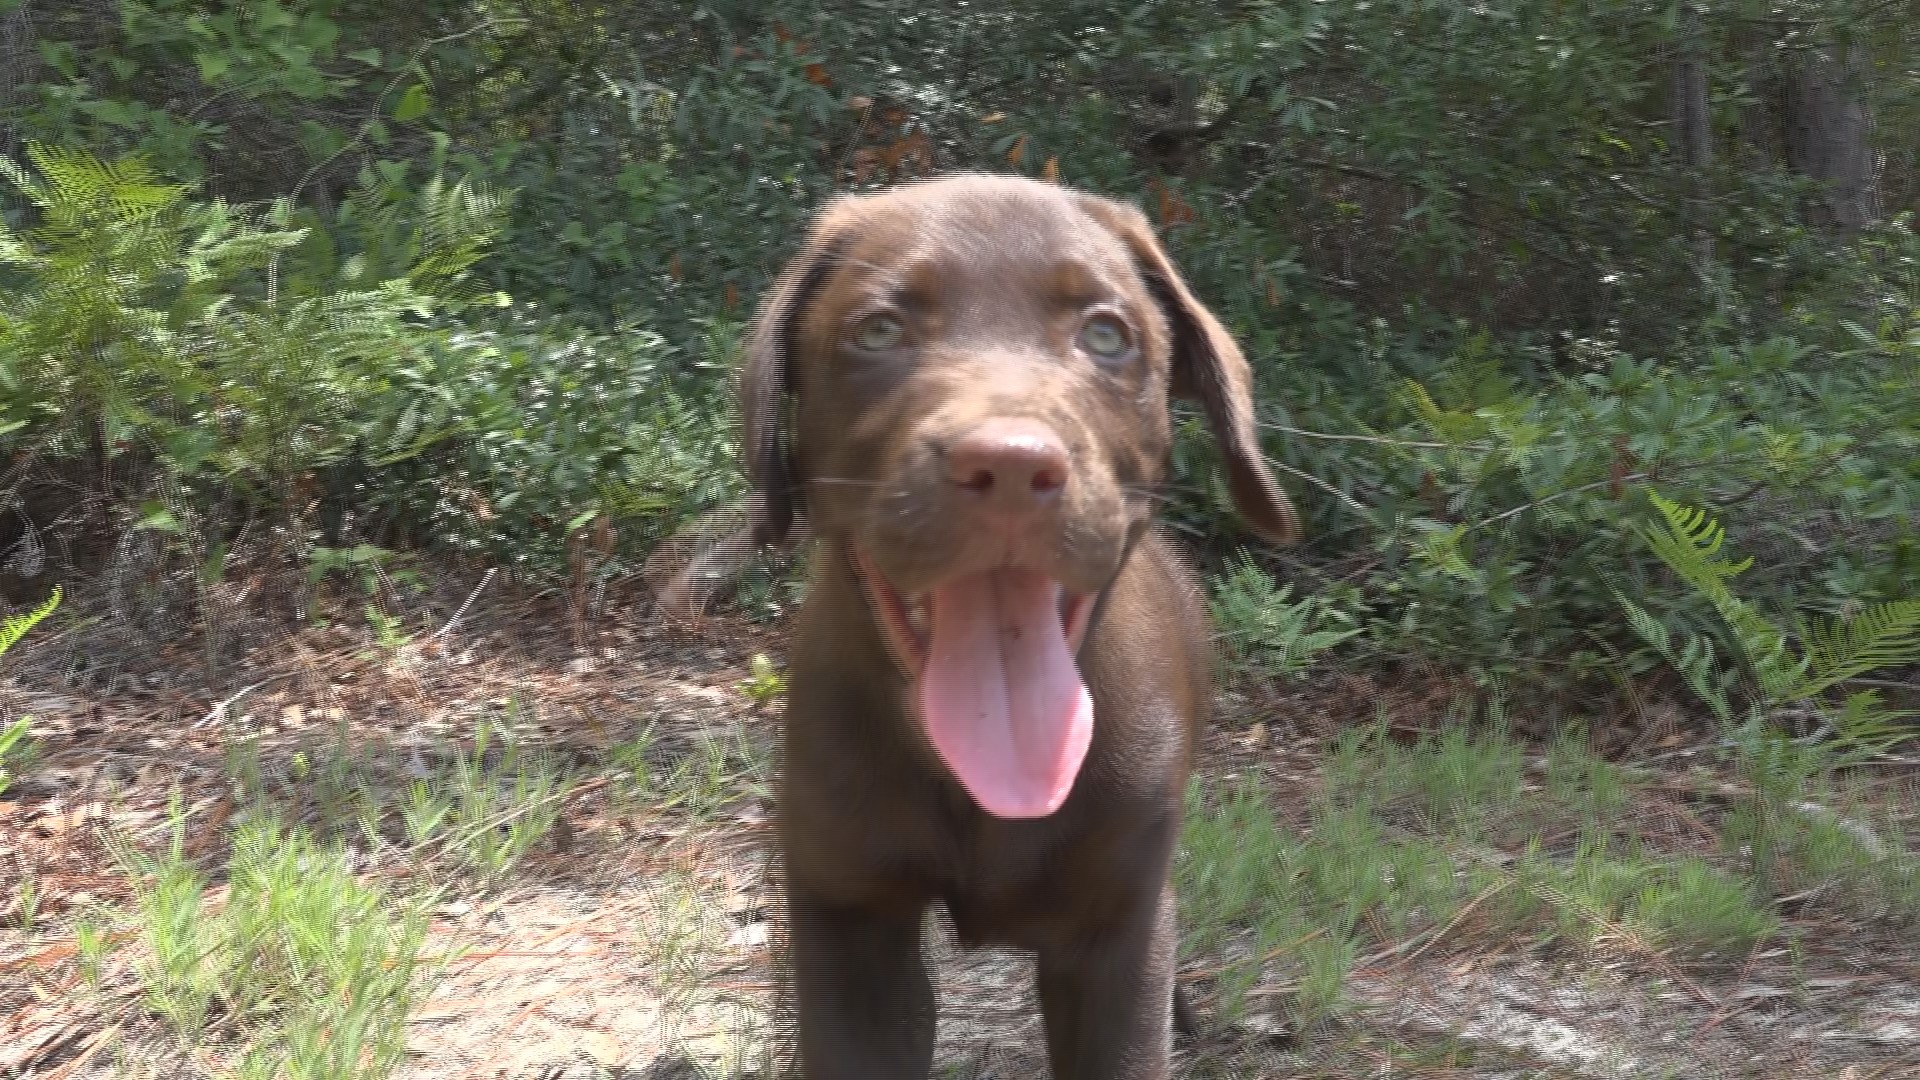 And he's only 8 weeks old, Hank if the newest SCDNR recruit and will be training soon.